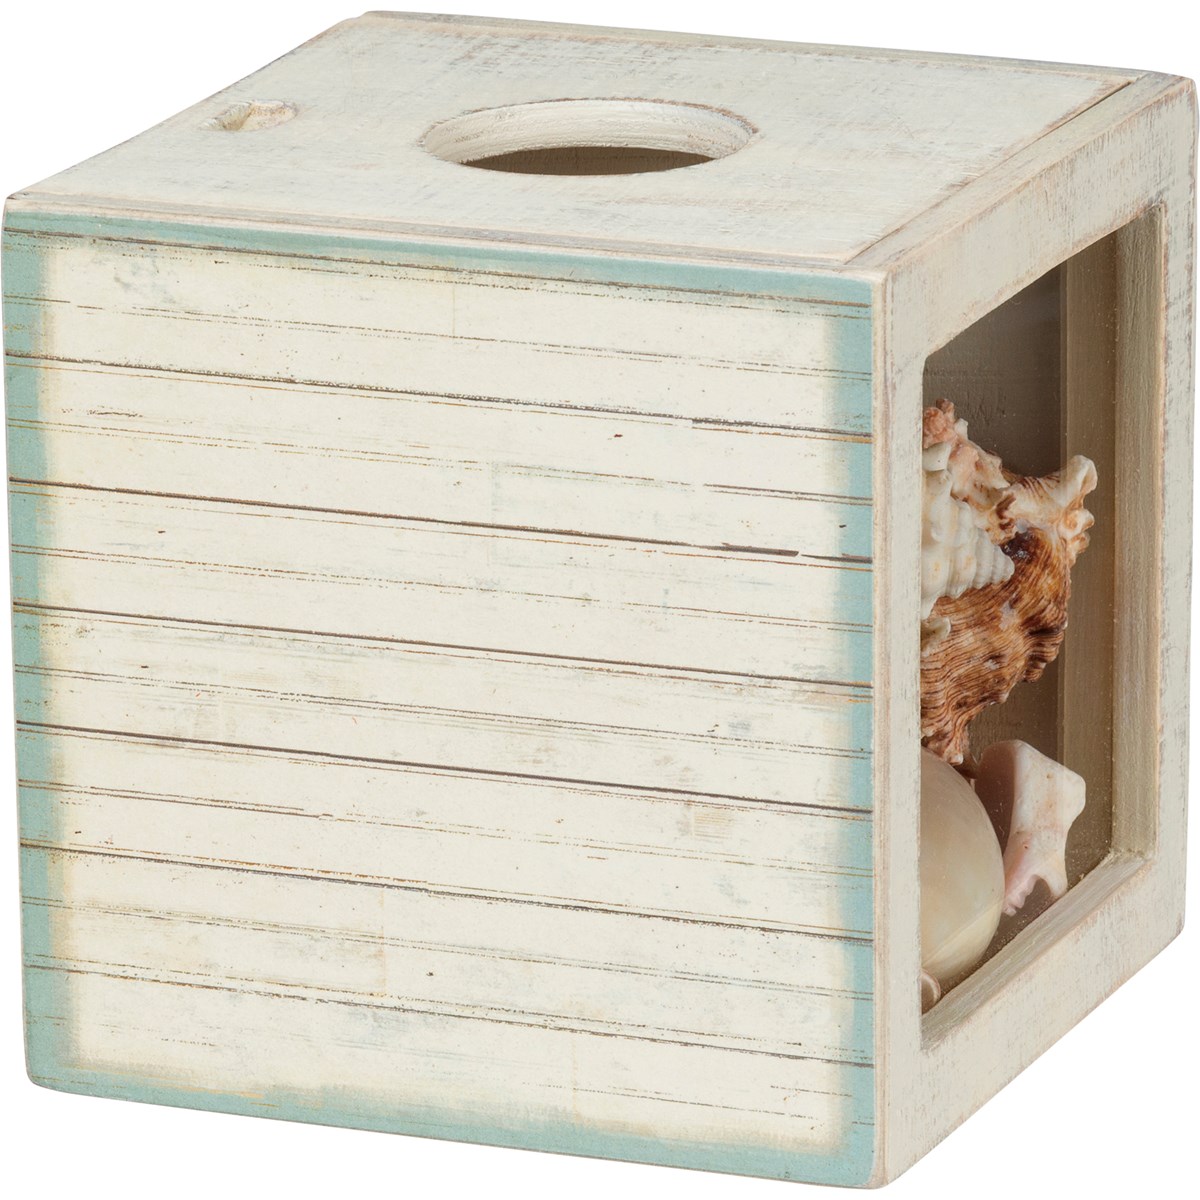 Shell Holder - Every Sea Shell Has A Story - 4.25" x 4.25" x 4.25" - Wood, Paper, Glass